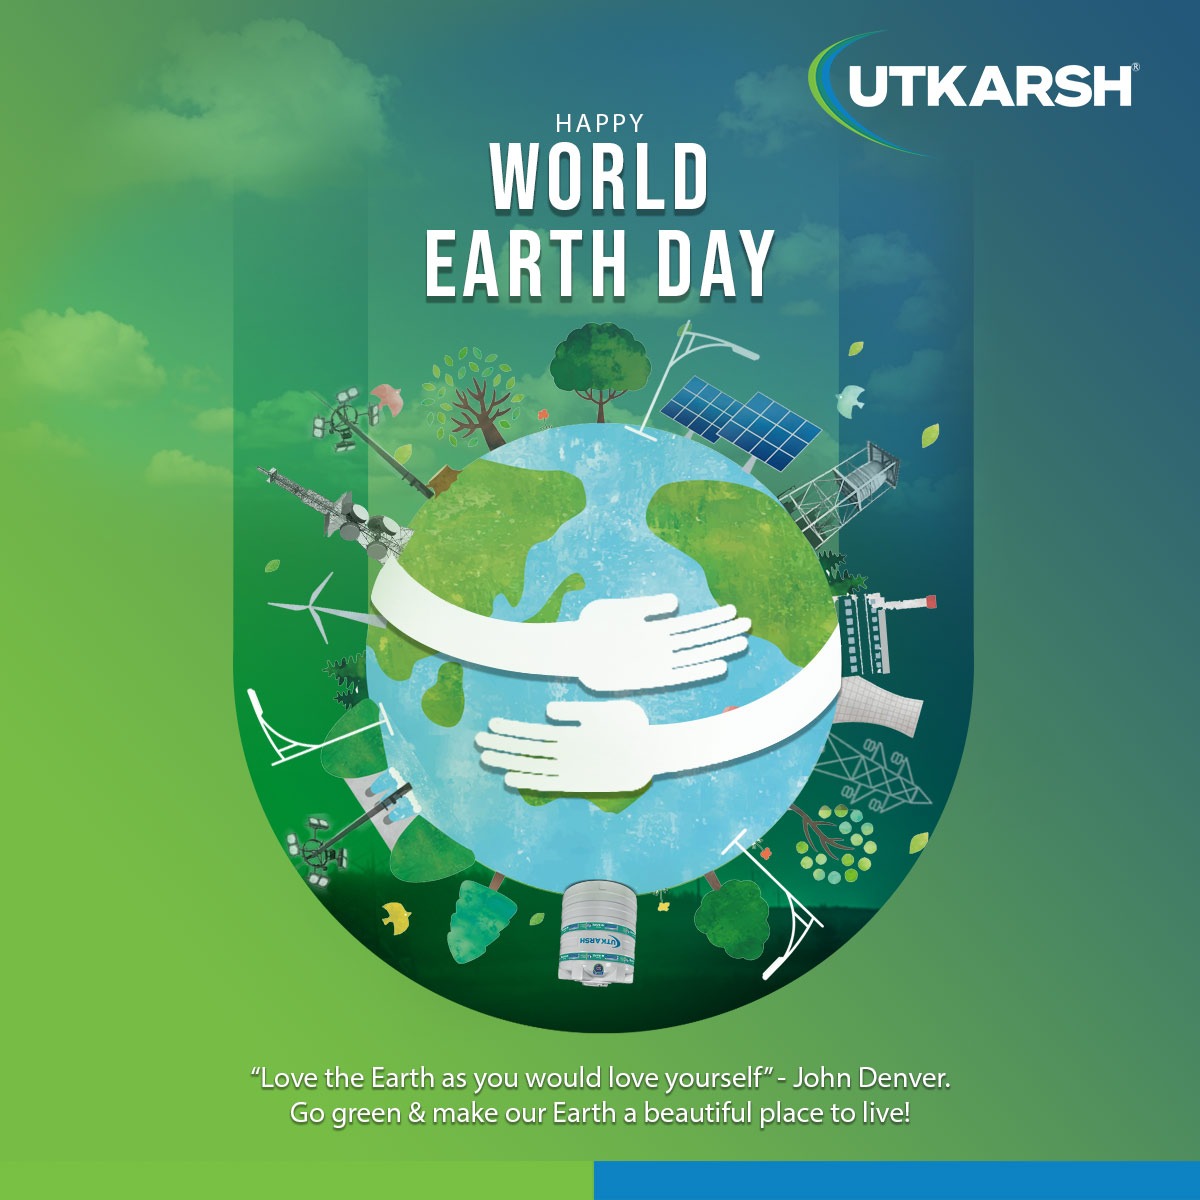 On World Earth Day, Utkarsh India reaffirms its commitment to a greener tomorrow. Every innovation we create prioritizes safety and sustainability for a healthier planet. 

#EarthDayEveryDay #SustainableLiving #GreenerTomorrow